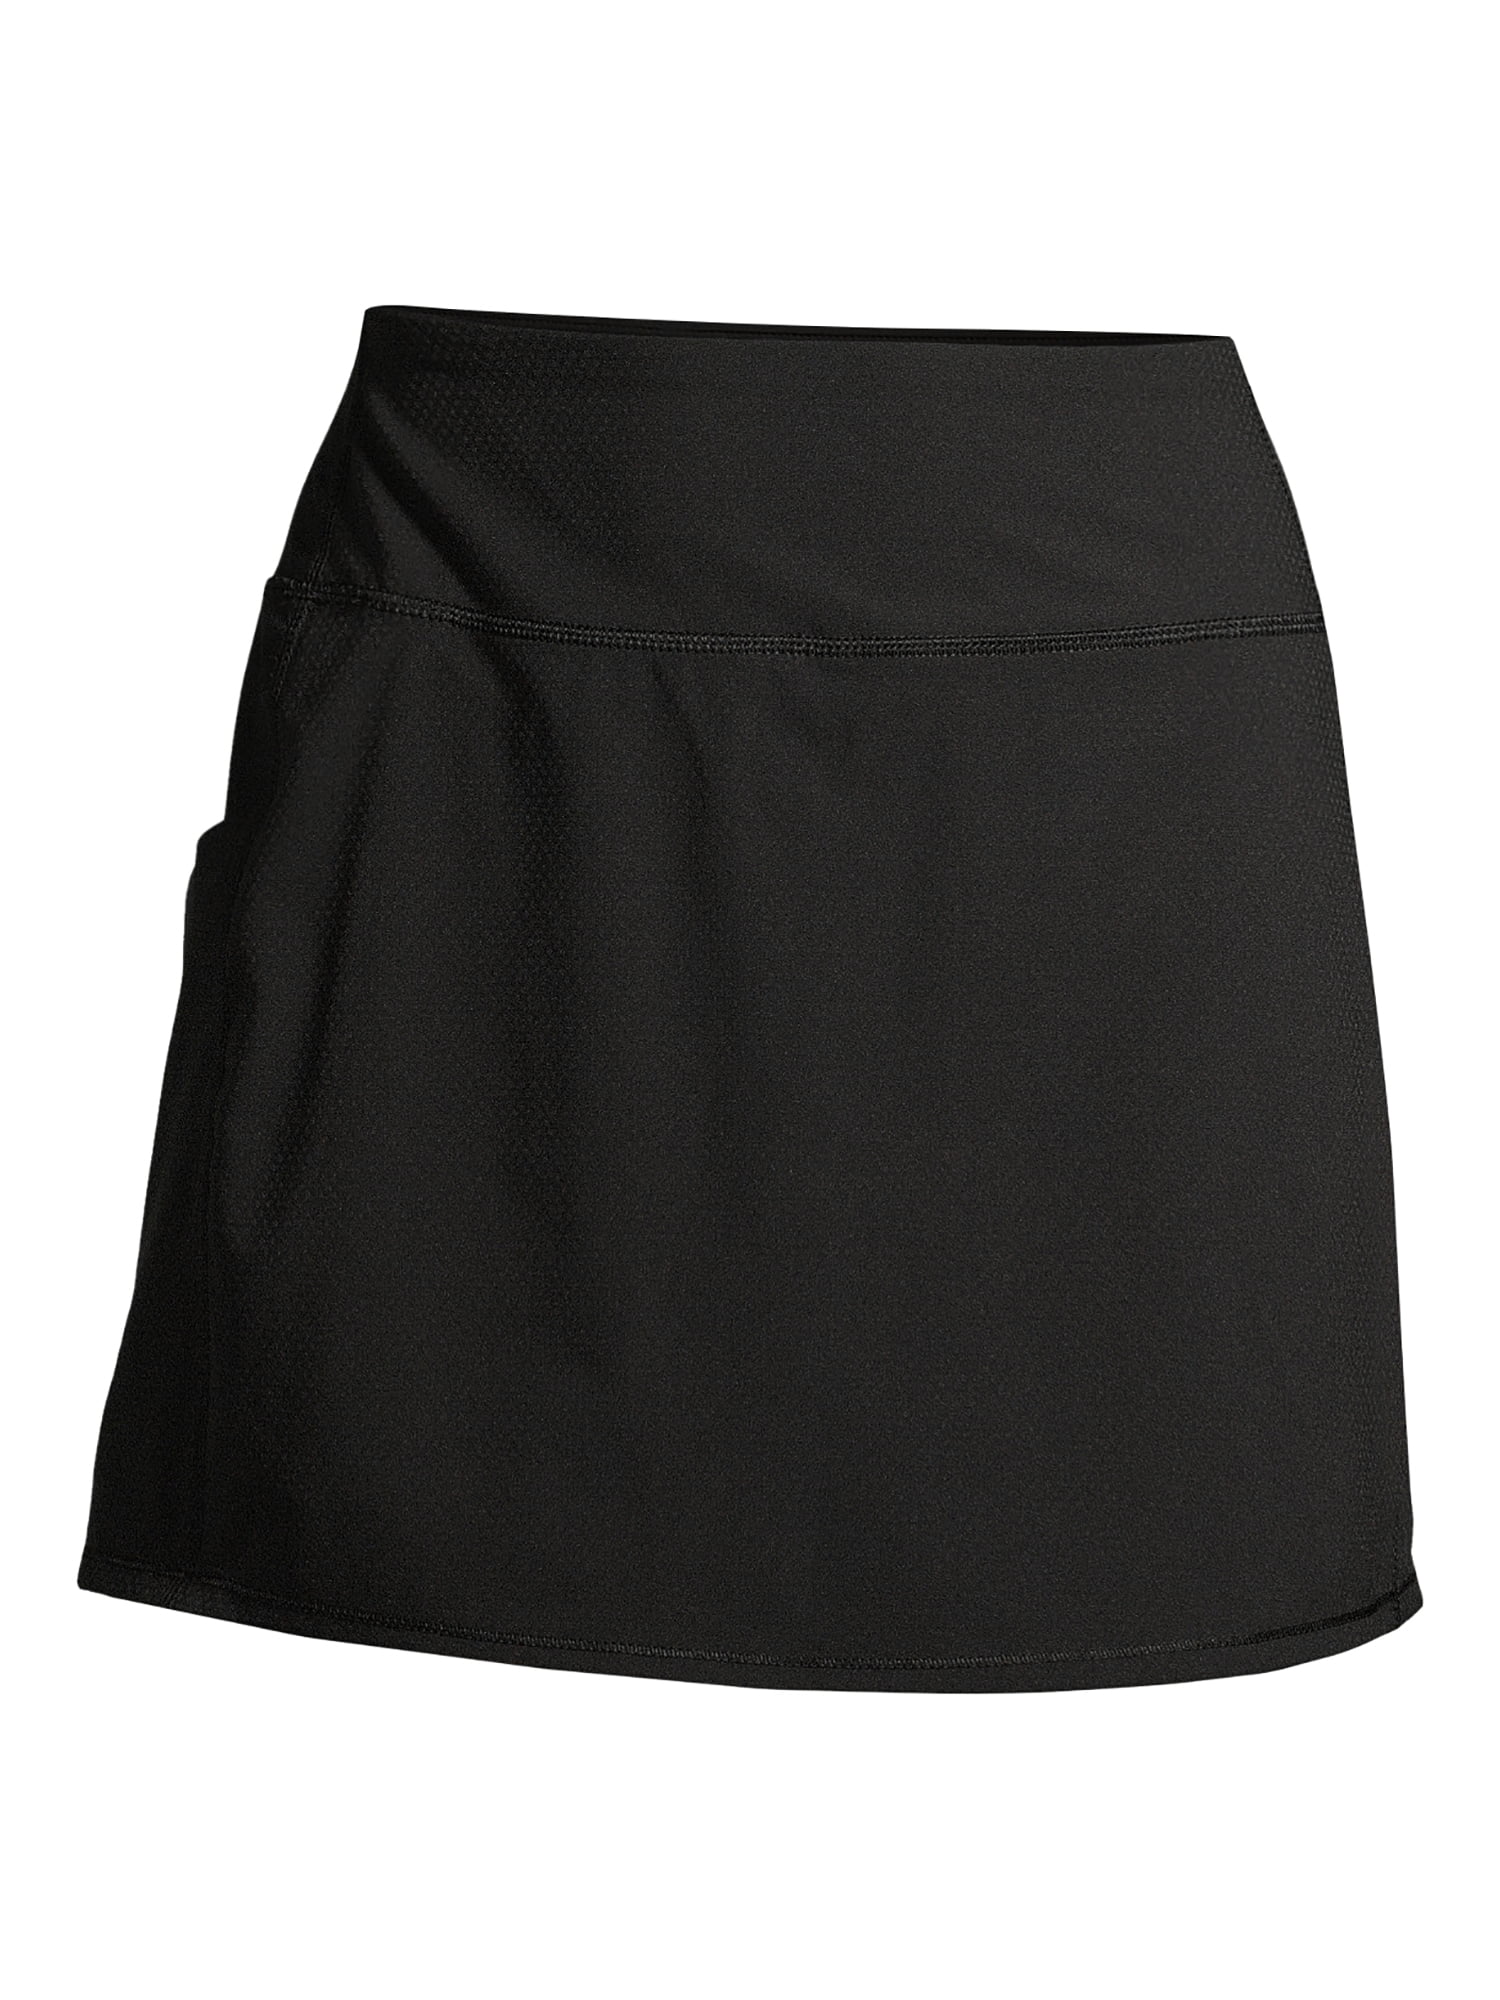 Avia Girls Solid Athletic Performance Fitted Skorts with Drawstring Black Soot 